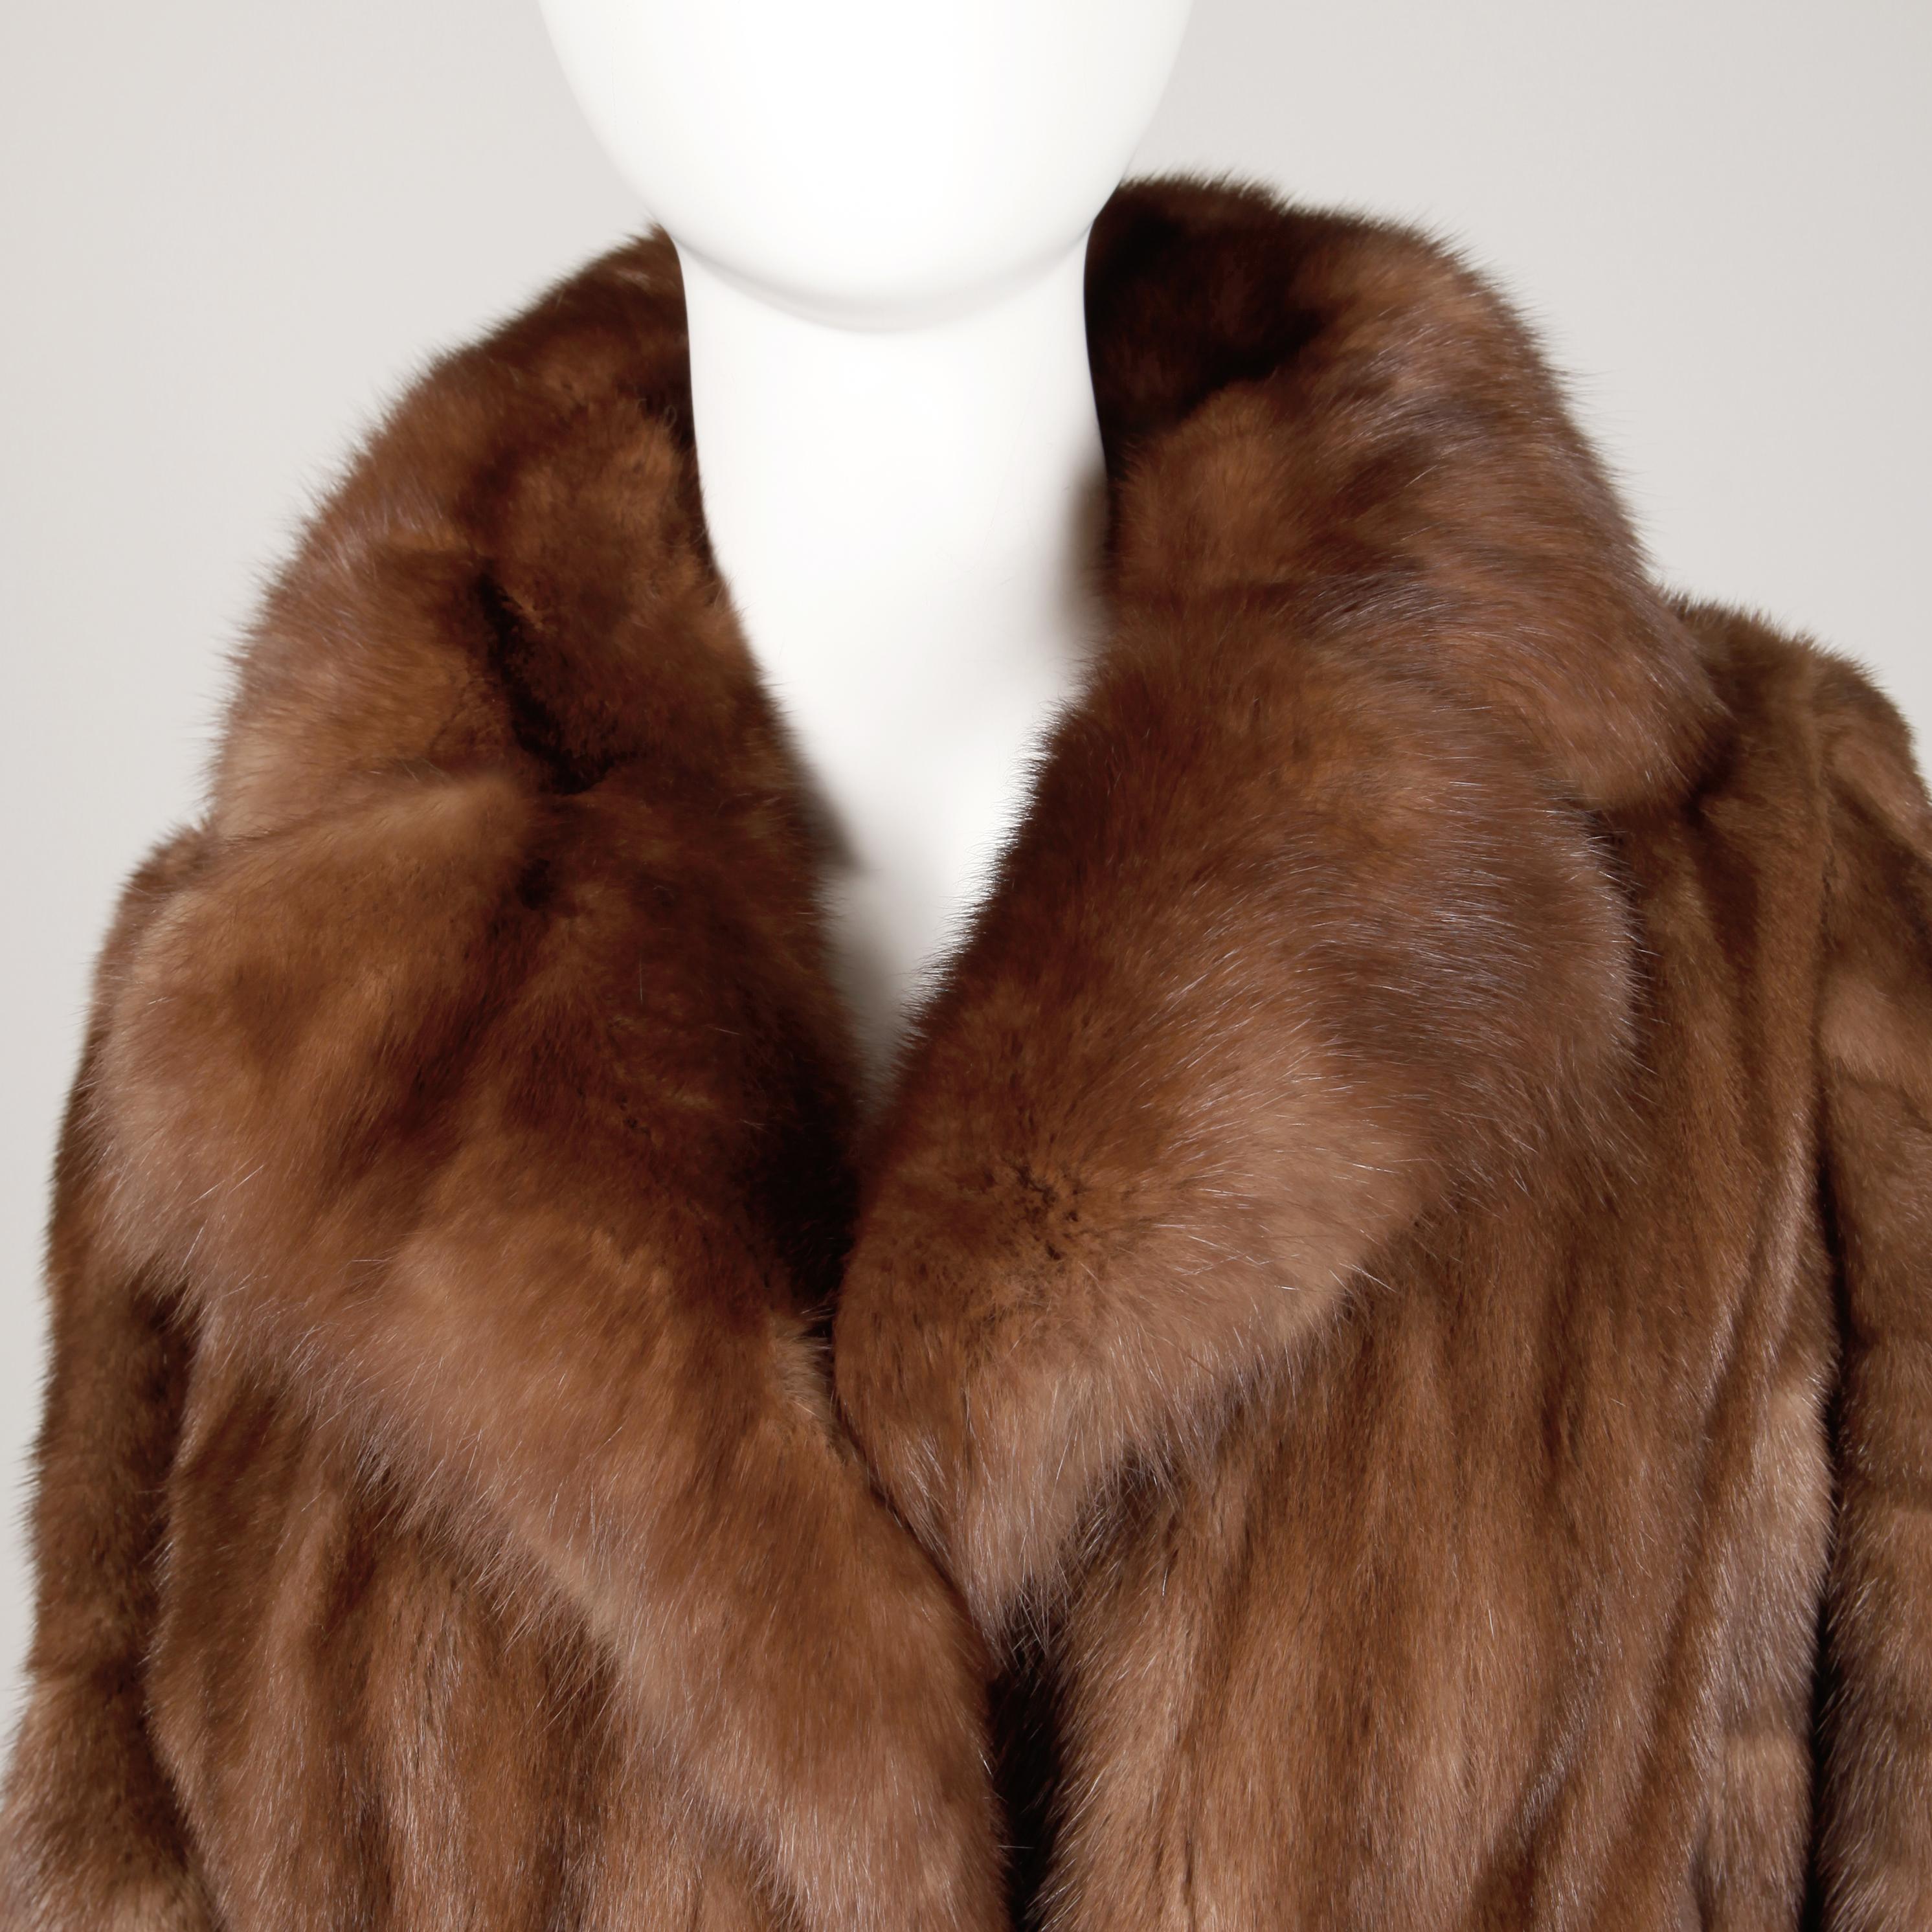 Stunning vintage demi buff mink fur coat with a plush sable fur collar from the estate of Pamela Lewis (Jerry Lewis, Gary Lewis). Light weight female mink pelts are beautifully matched. Diagonal flared sleeves and flared sweep. Fully lined with